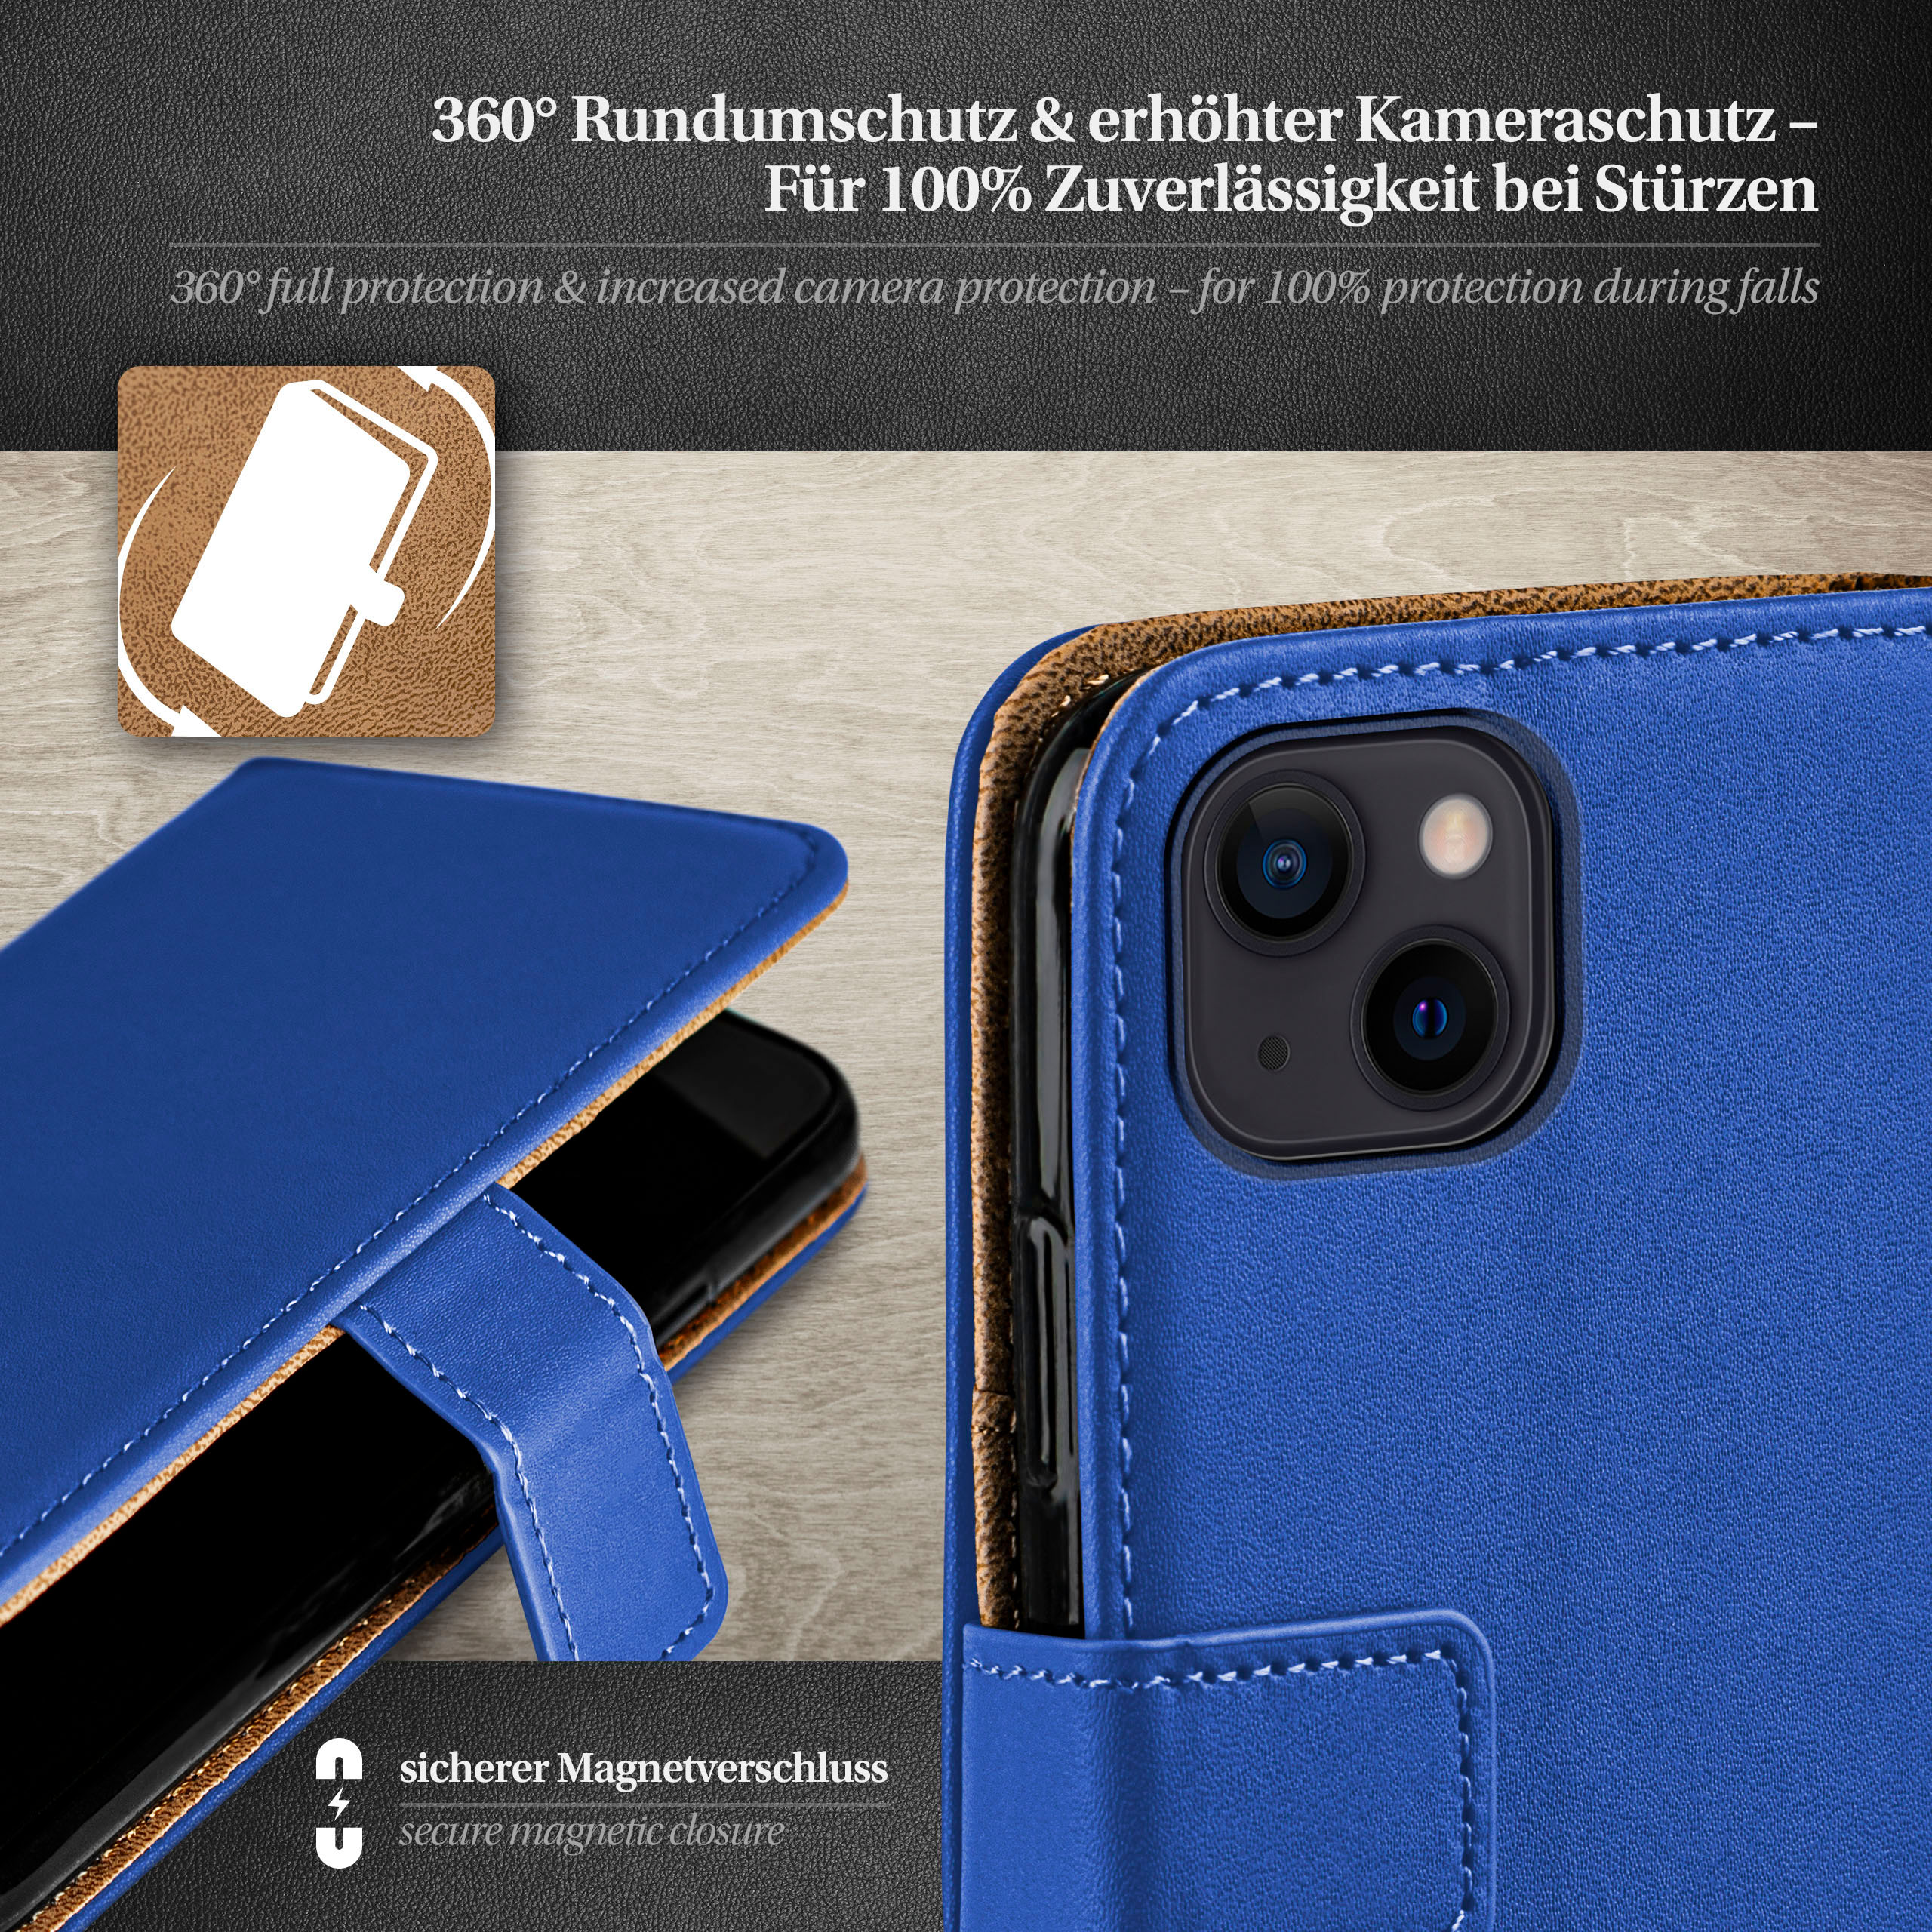 Book Royal-Blue MOEX Apple, 13, iPhone Case, Bookcover,